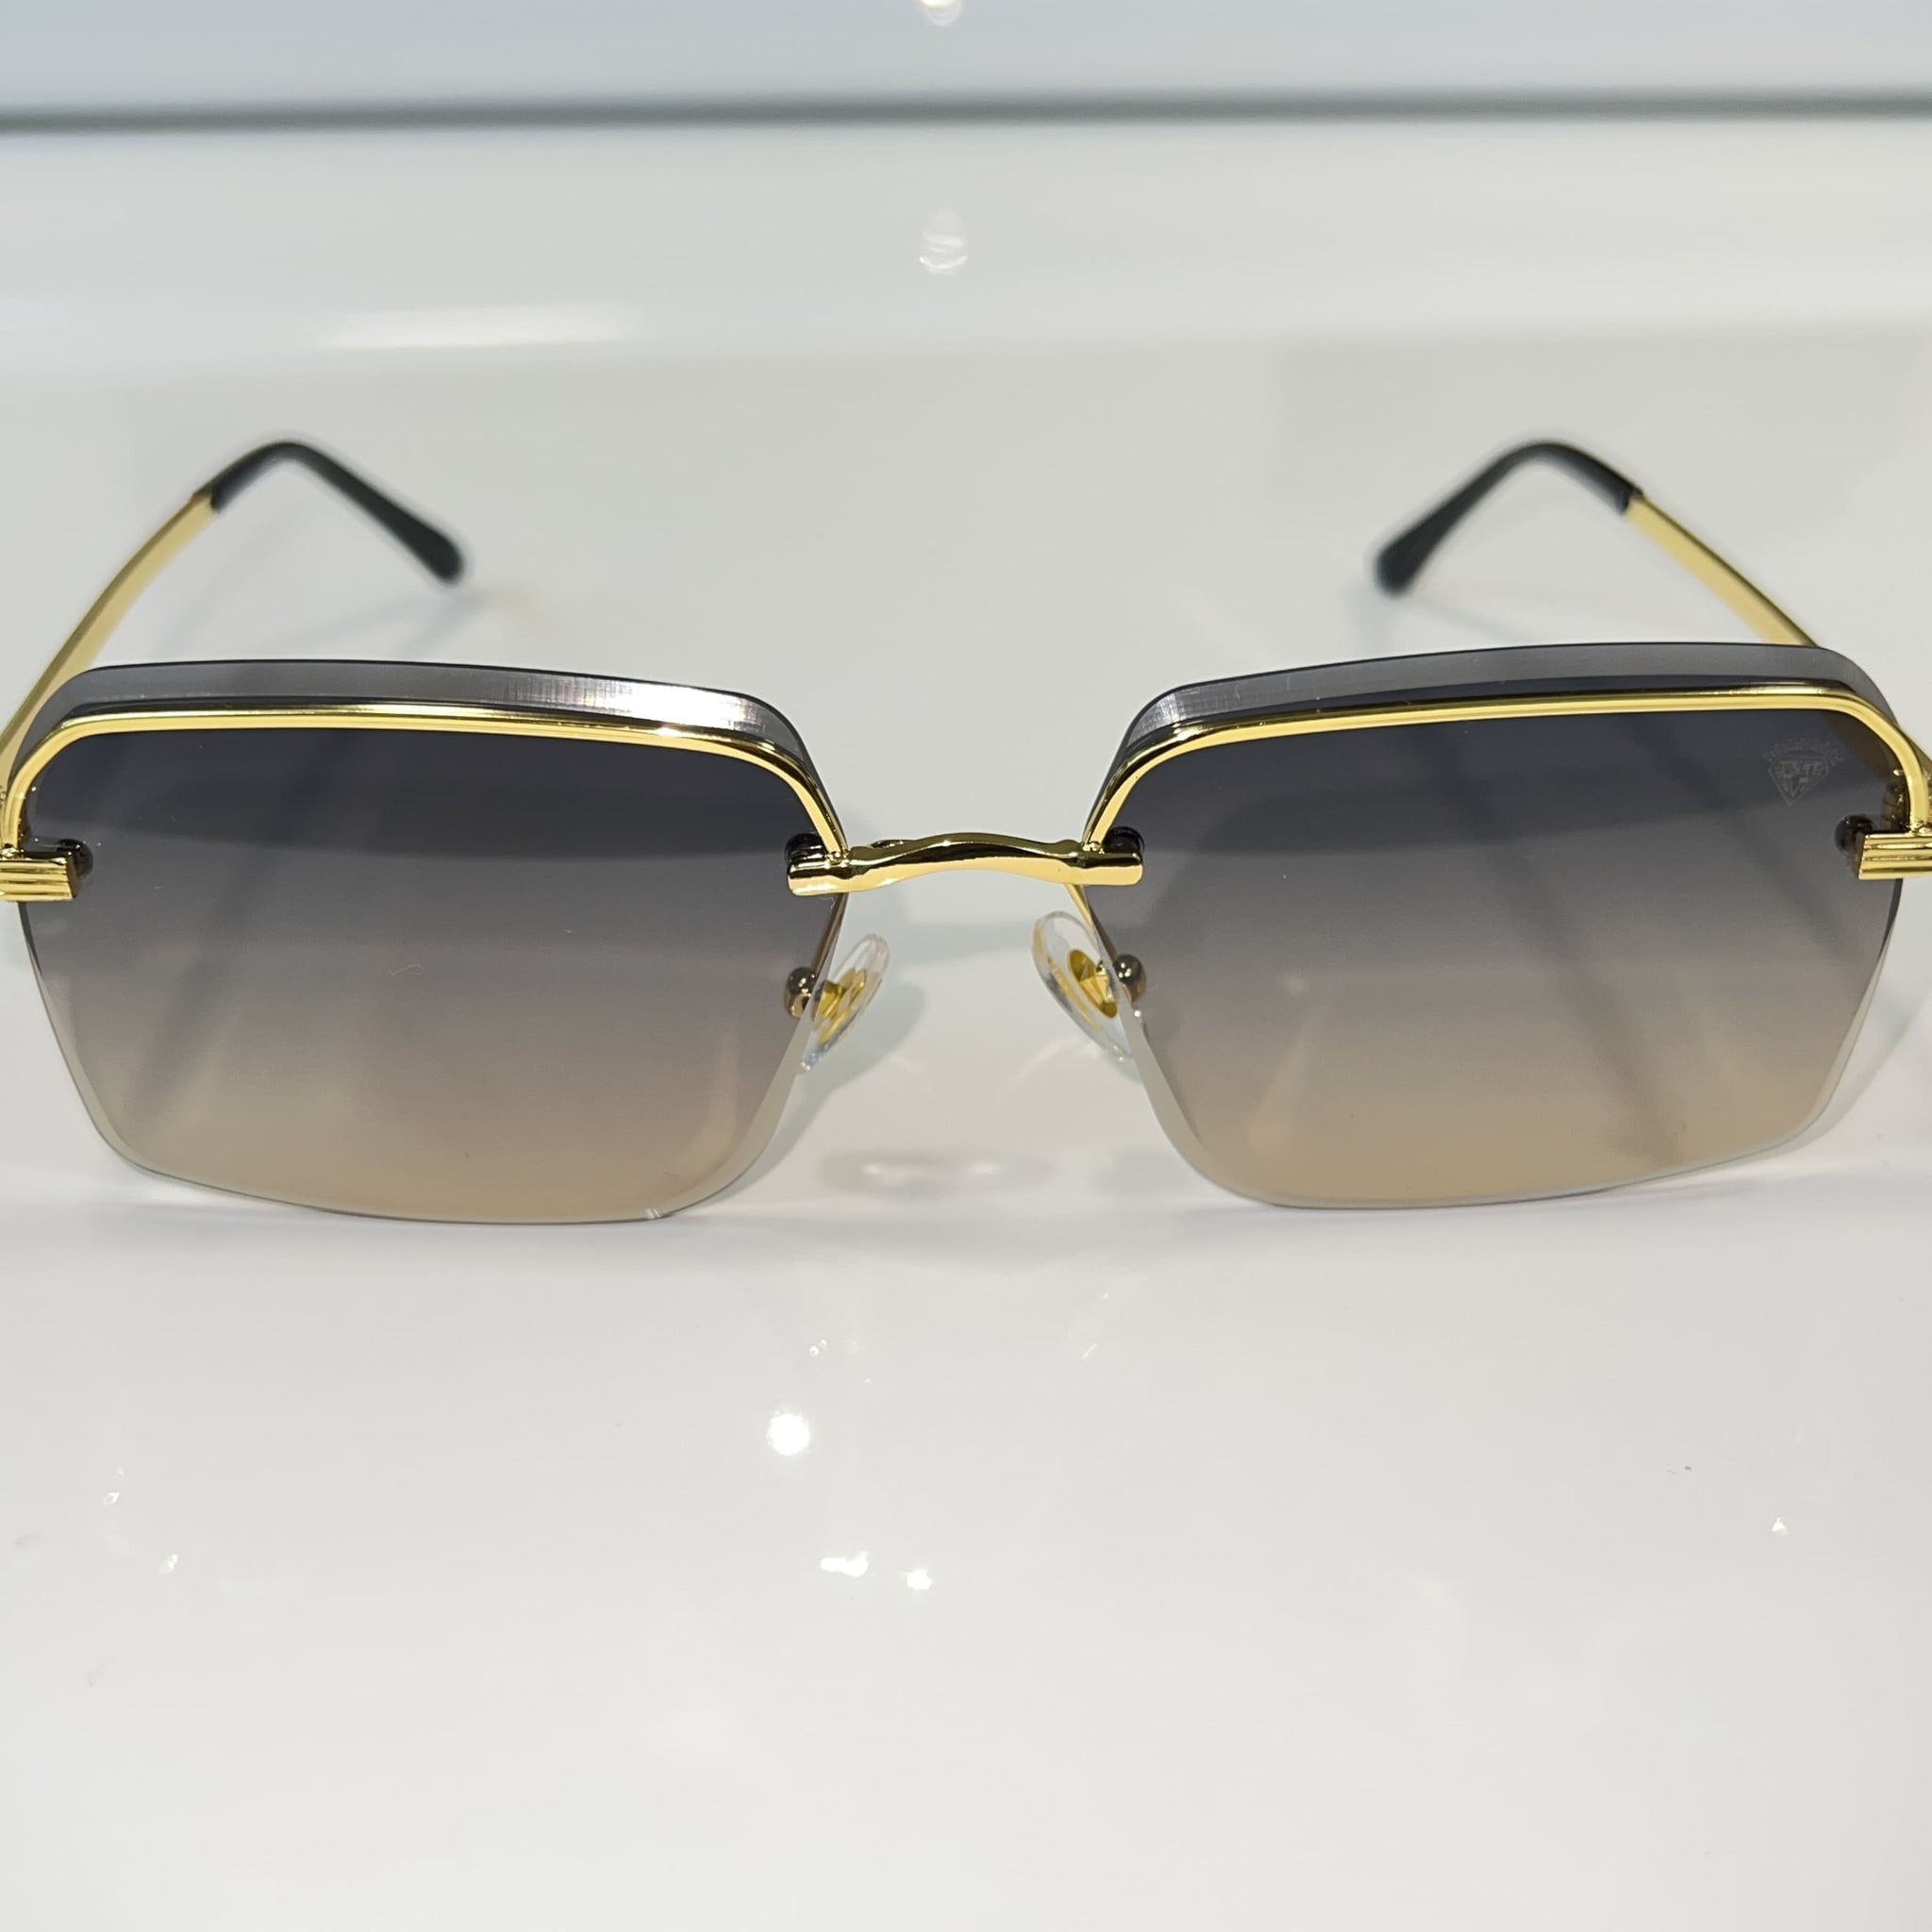 Invincible Glasses - 14k gold plated - Black / Grey Shade - Sehgal Glasses